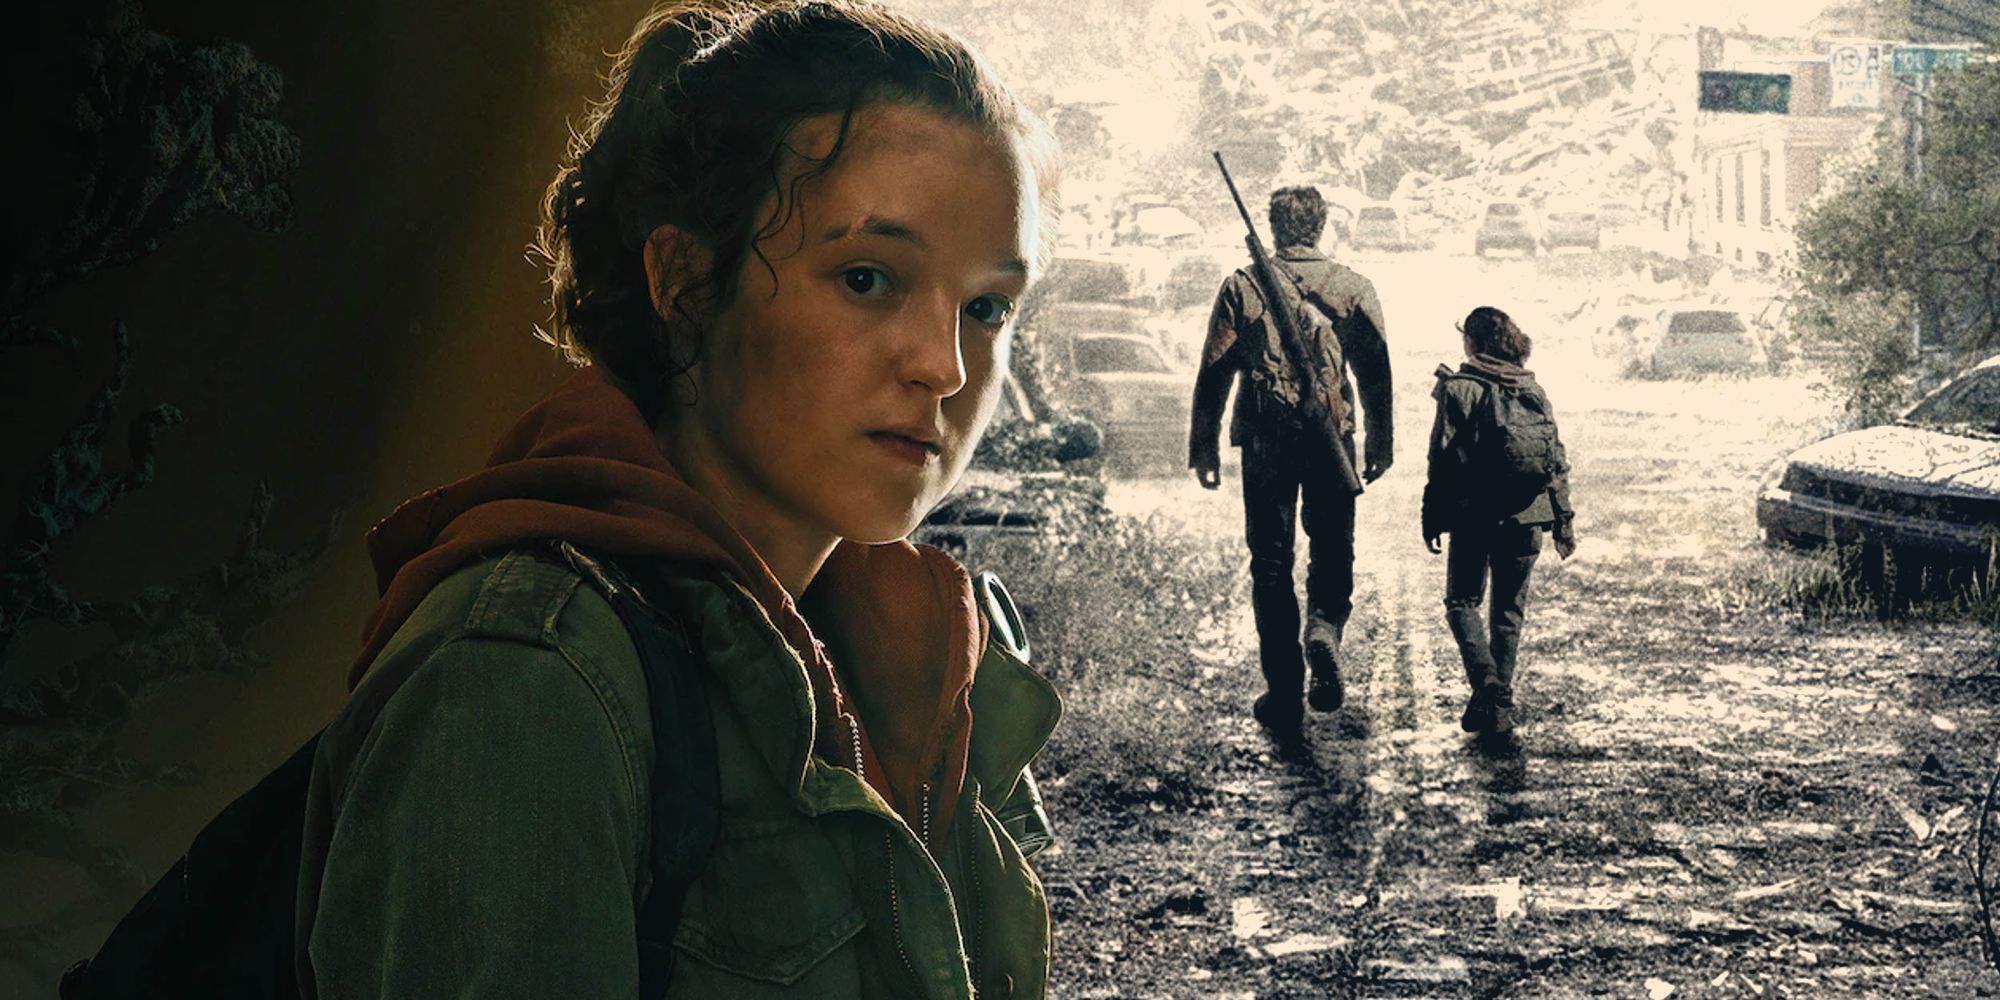 Bella Ramsey as Ellie in her official character poster next to the poster for HBO's The Last of Us